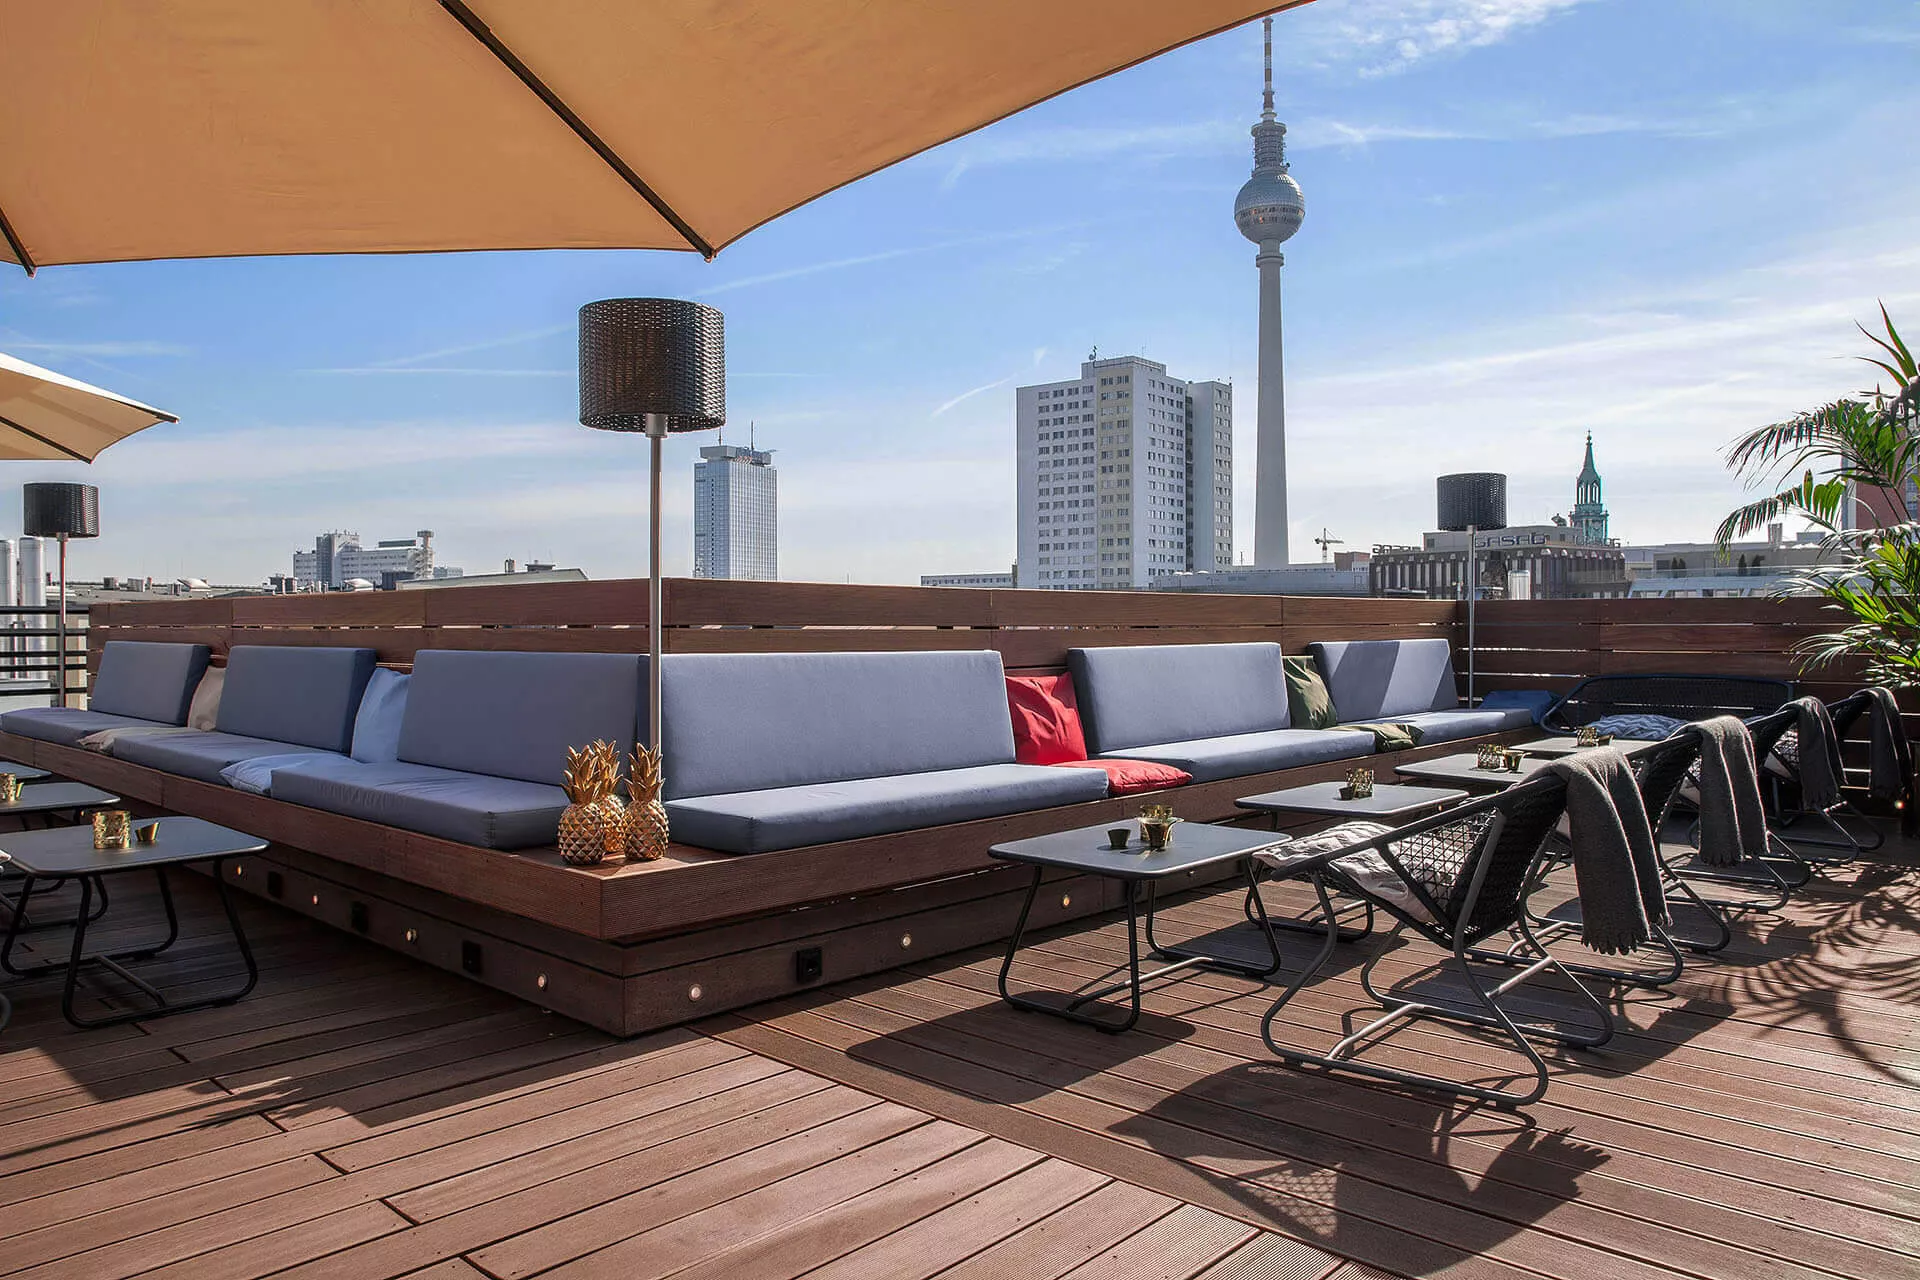 The Amano Rooftop in Germany, Europe  - Rated 0.7